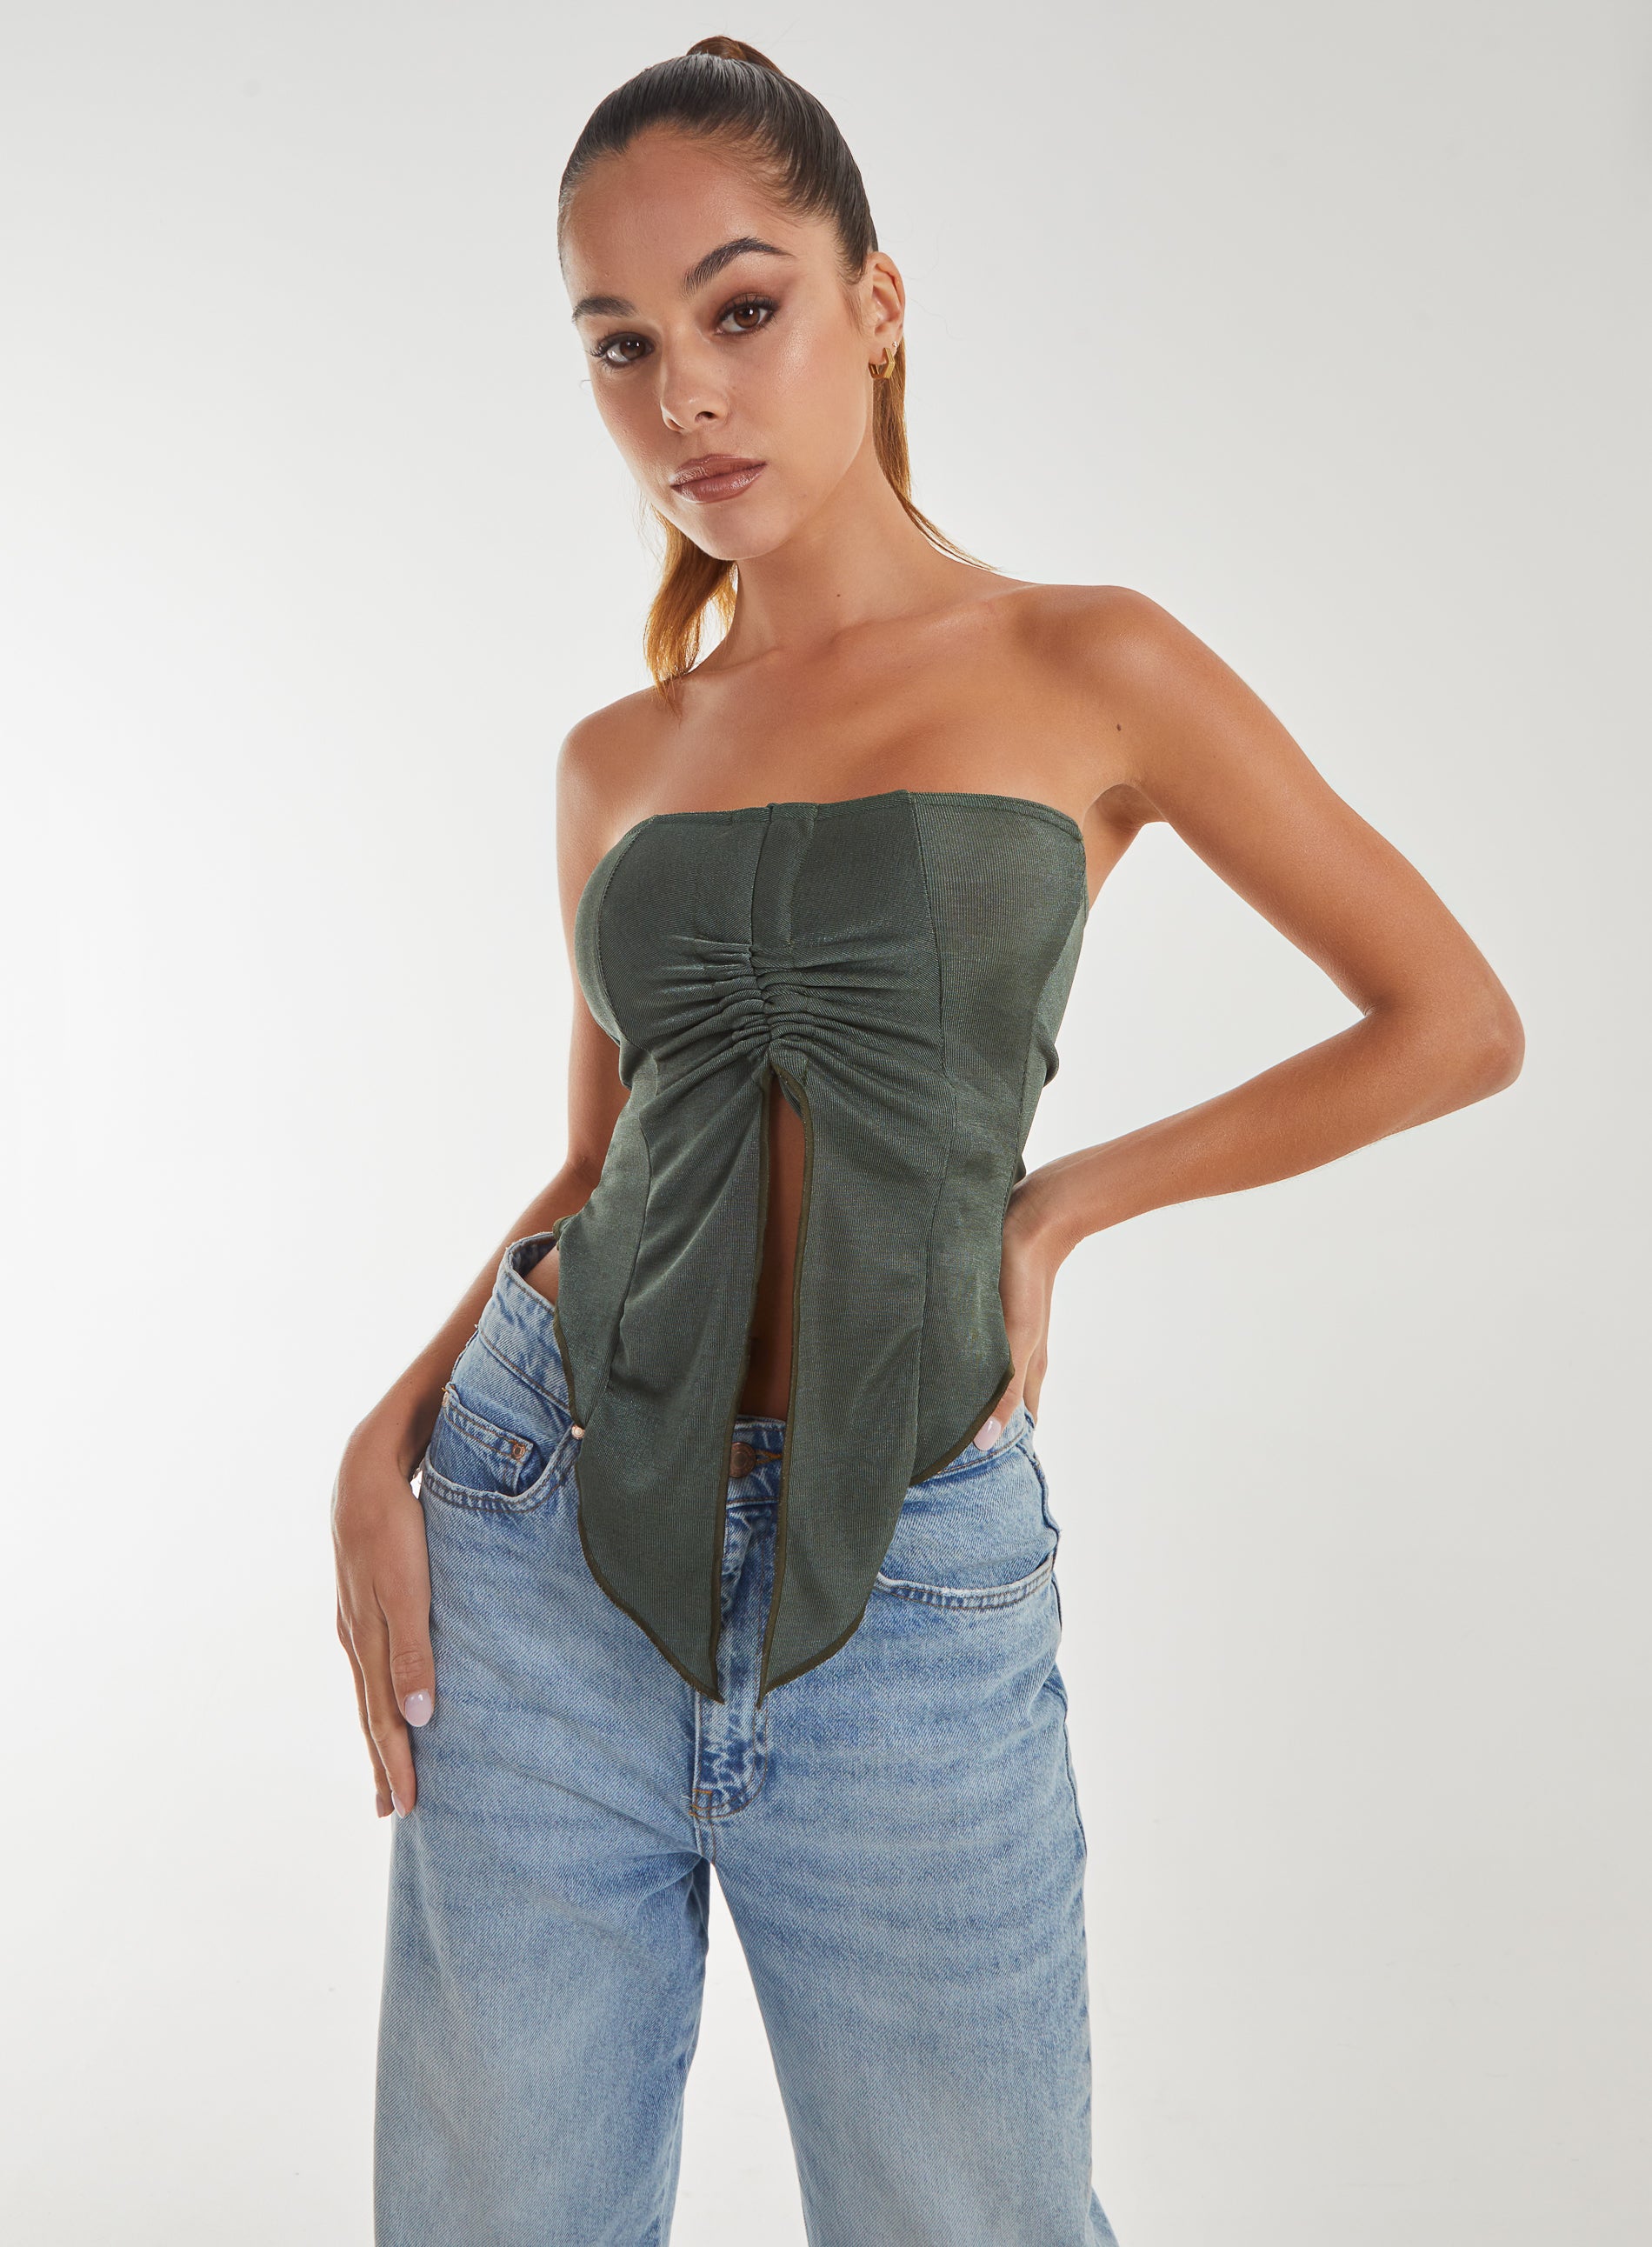 Butterfly Effect Top  - L  - OLIVE product